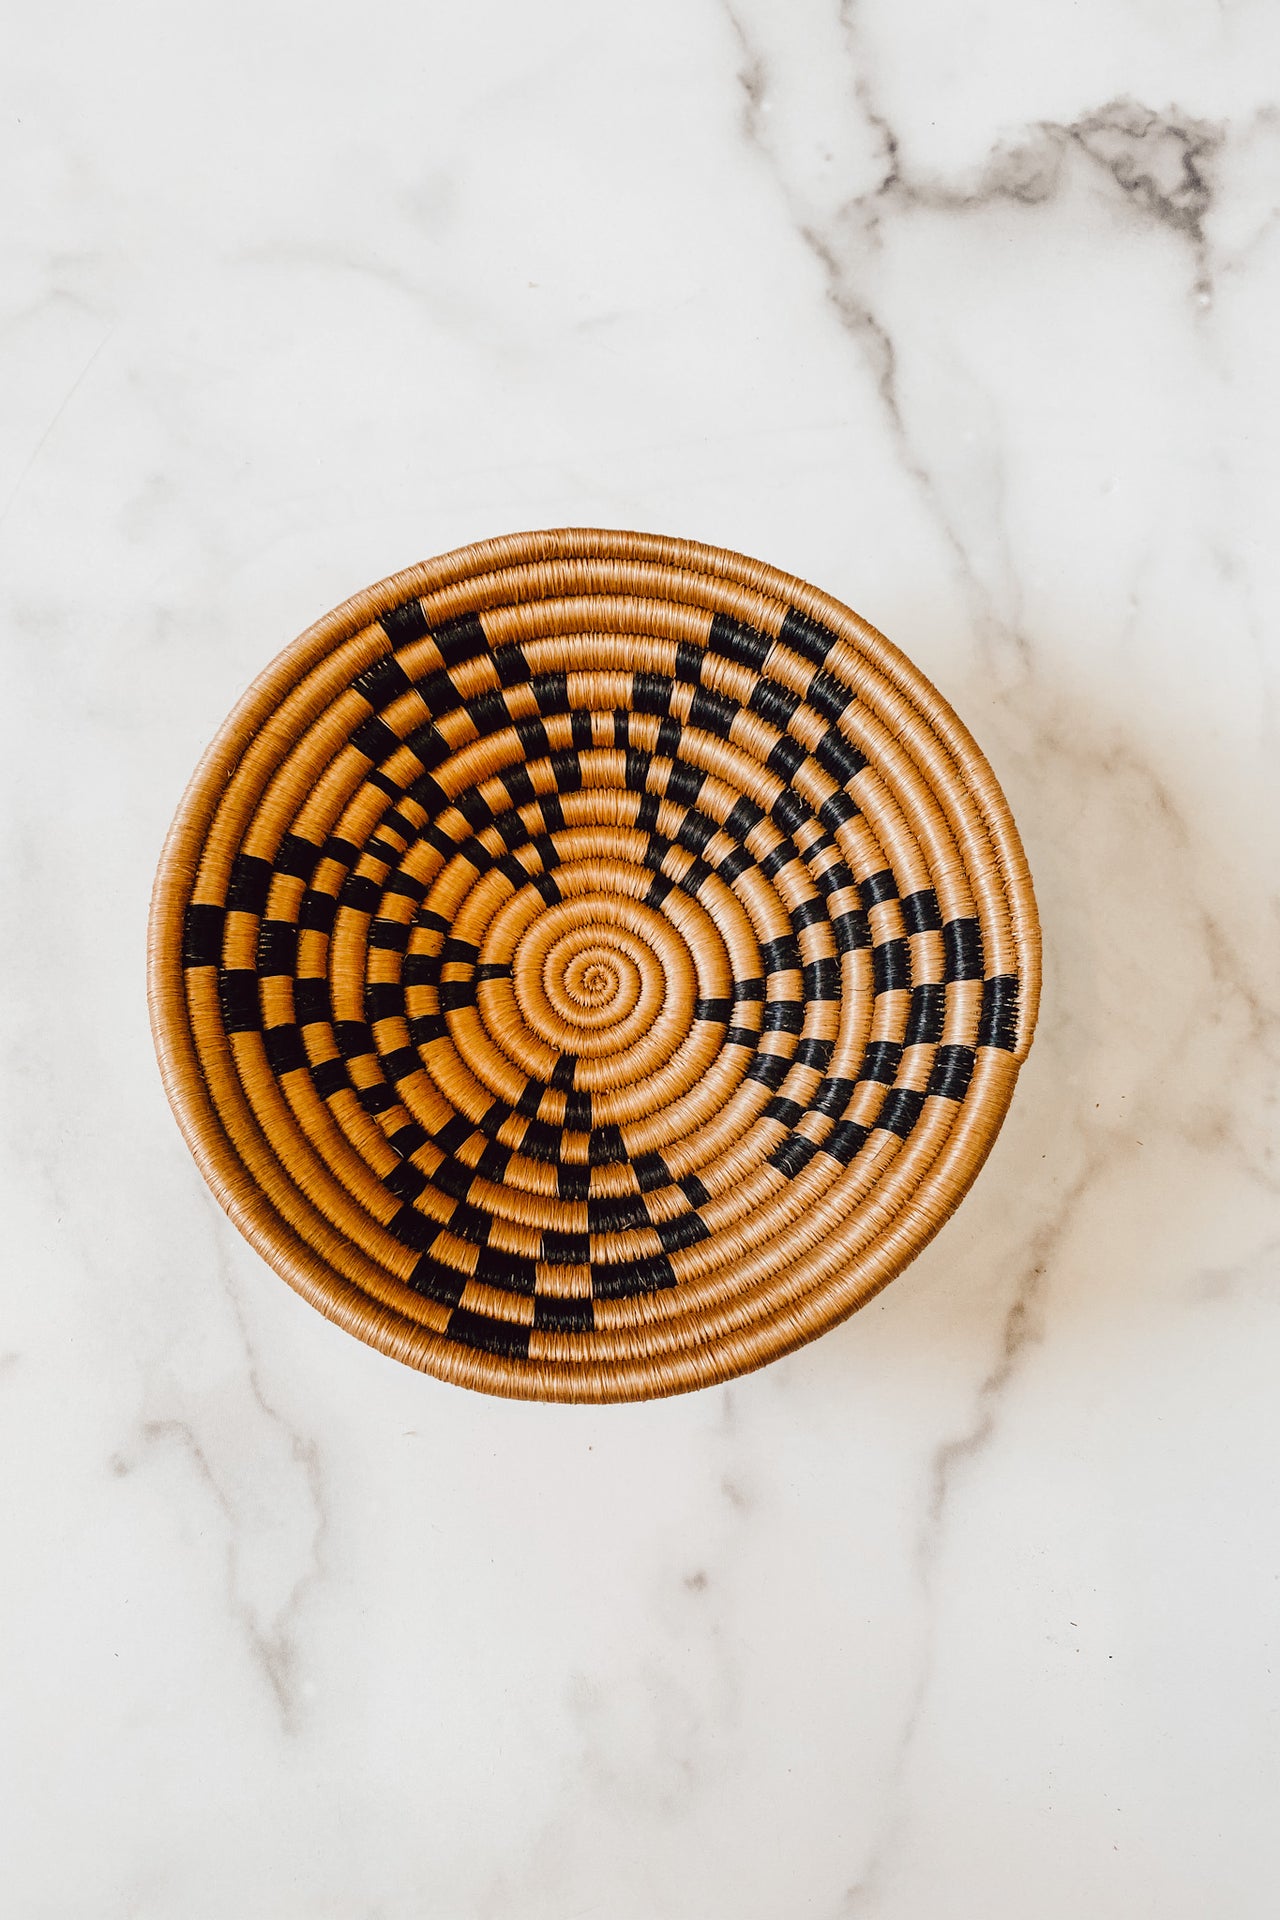 Constellation Woven Bowls